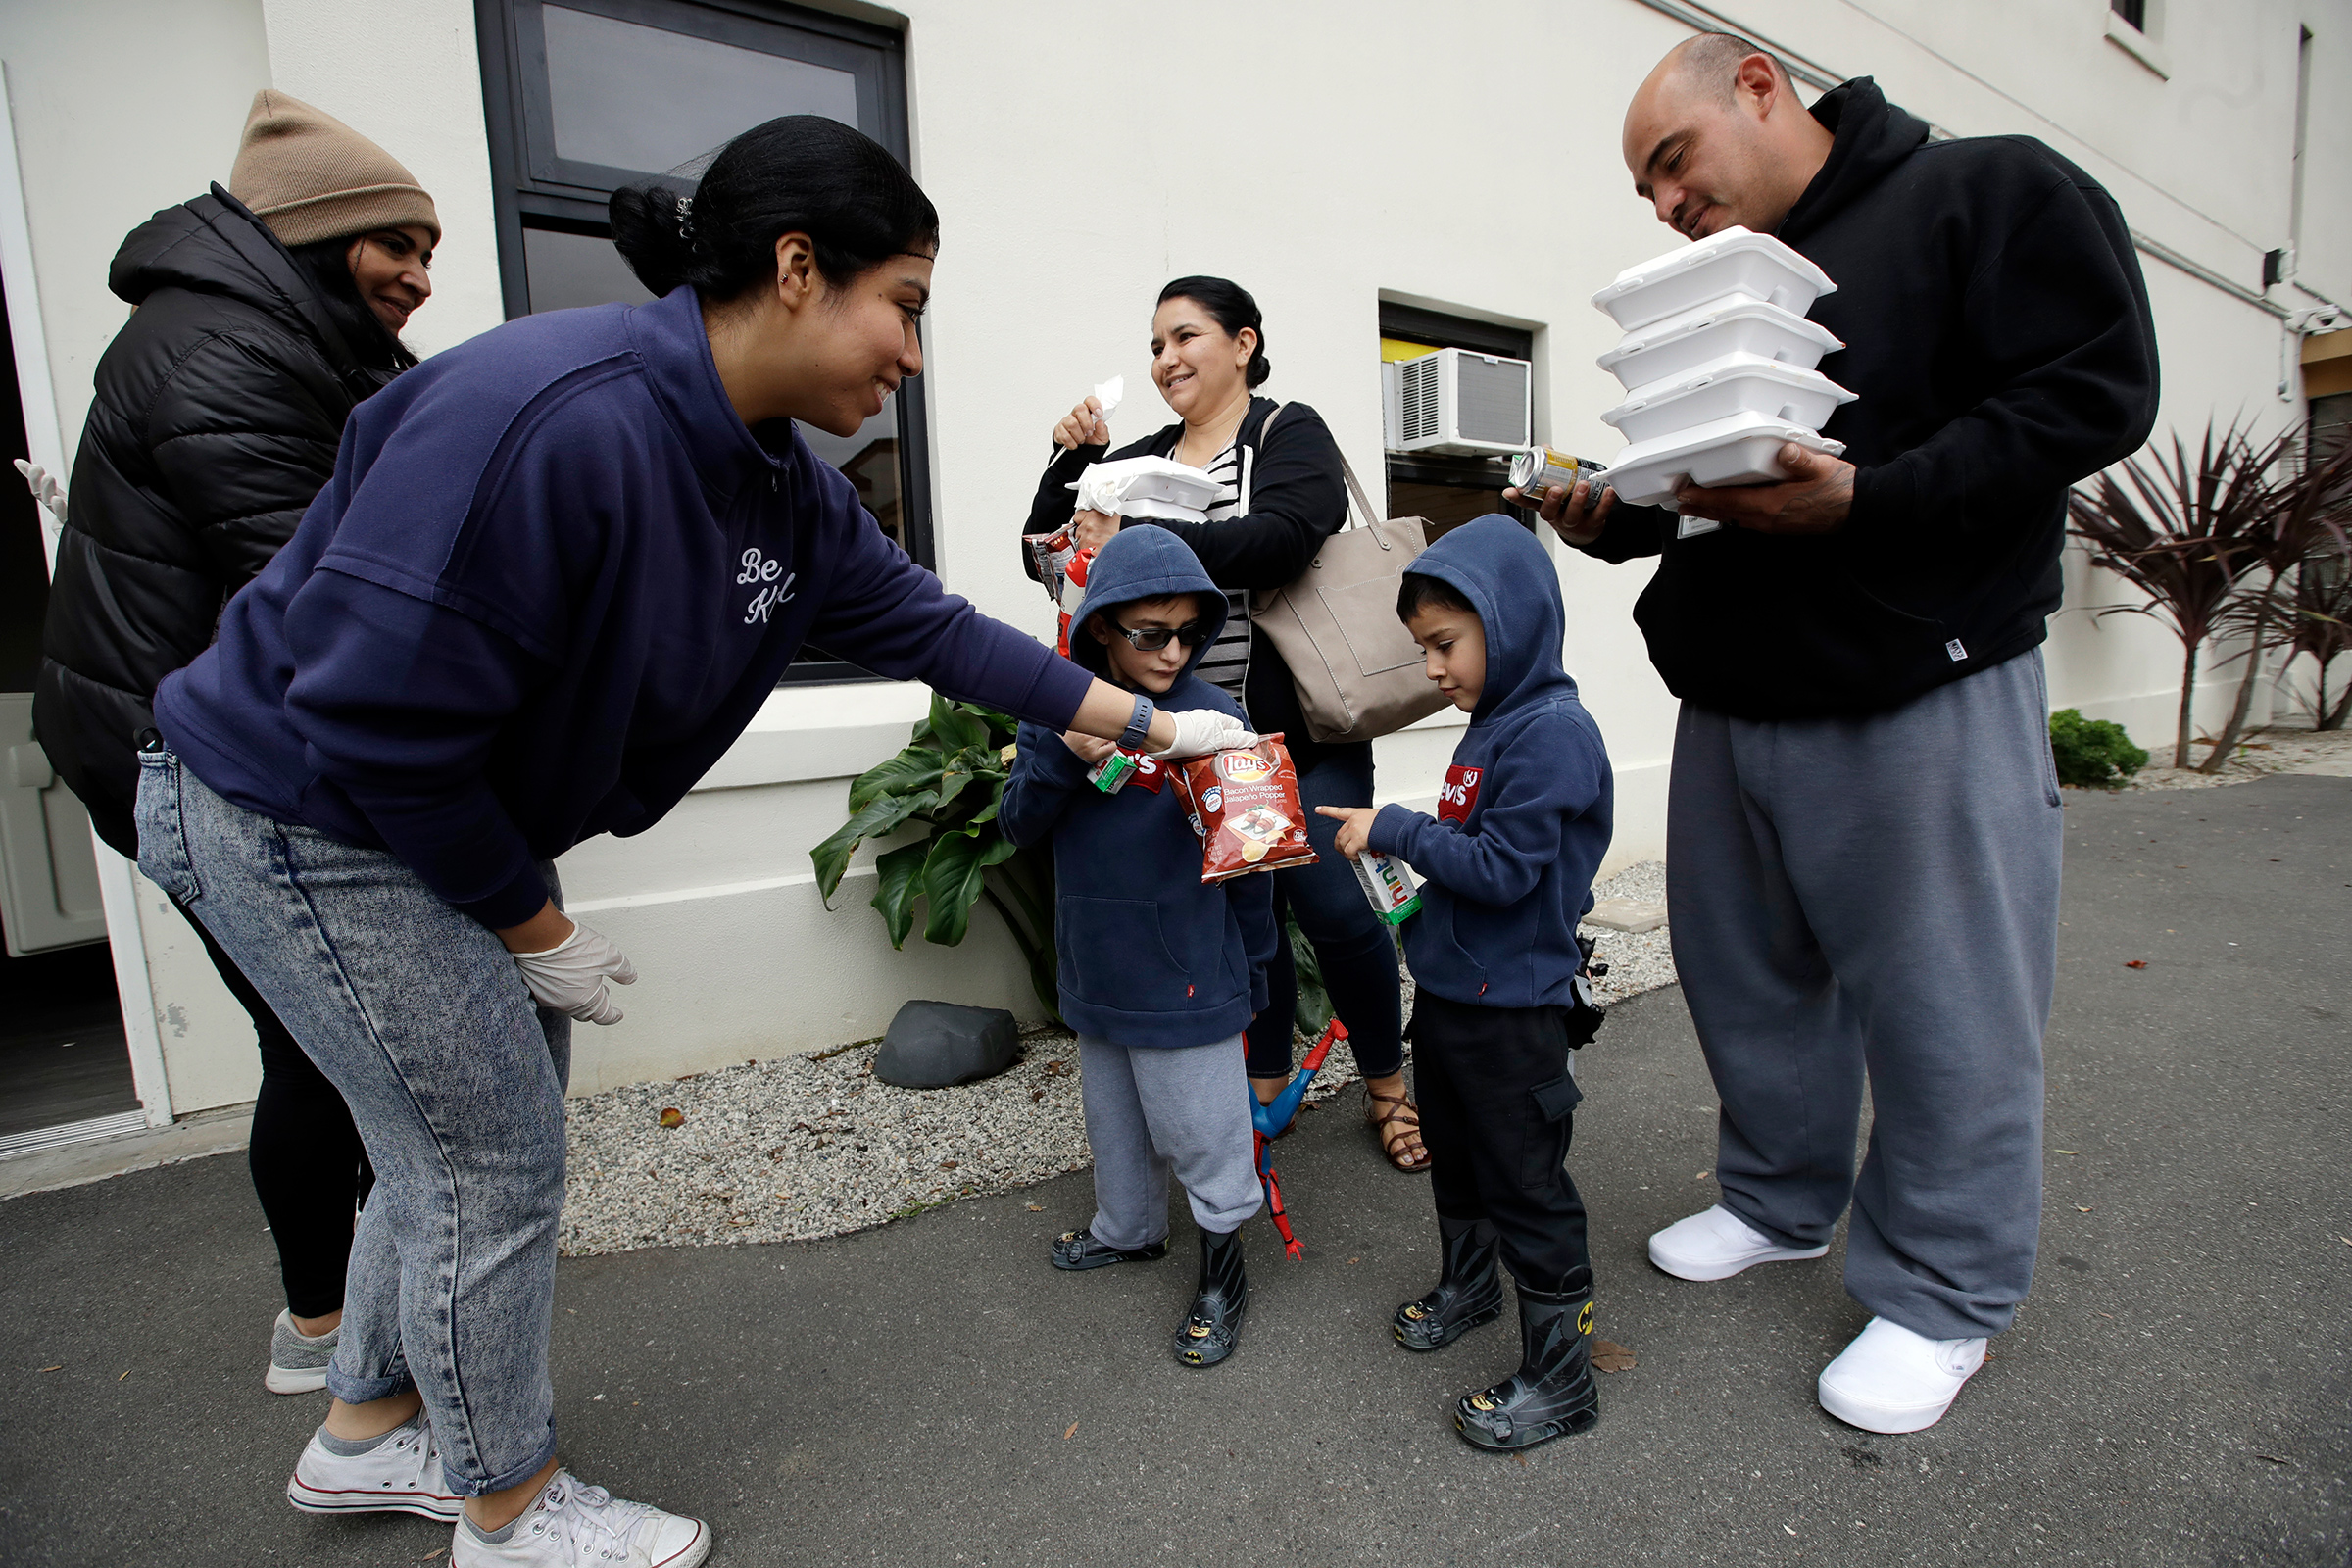 Volunteer Pahola Campos, second from left, hands out lunches to the Garcia family — mom Marie, dad Sergio, at right, and their children — on Mar. 16 at a food distribution center set up by the Dream Center for those in need due to the coronavirus outbreak in Los Angeles (Marcio Jose Sanchez—AP)